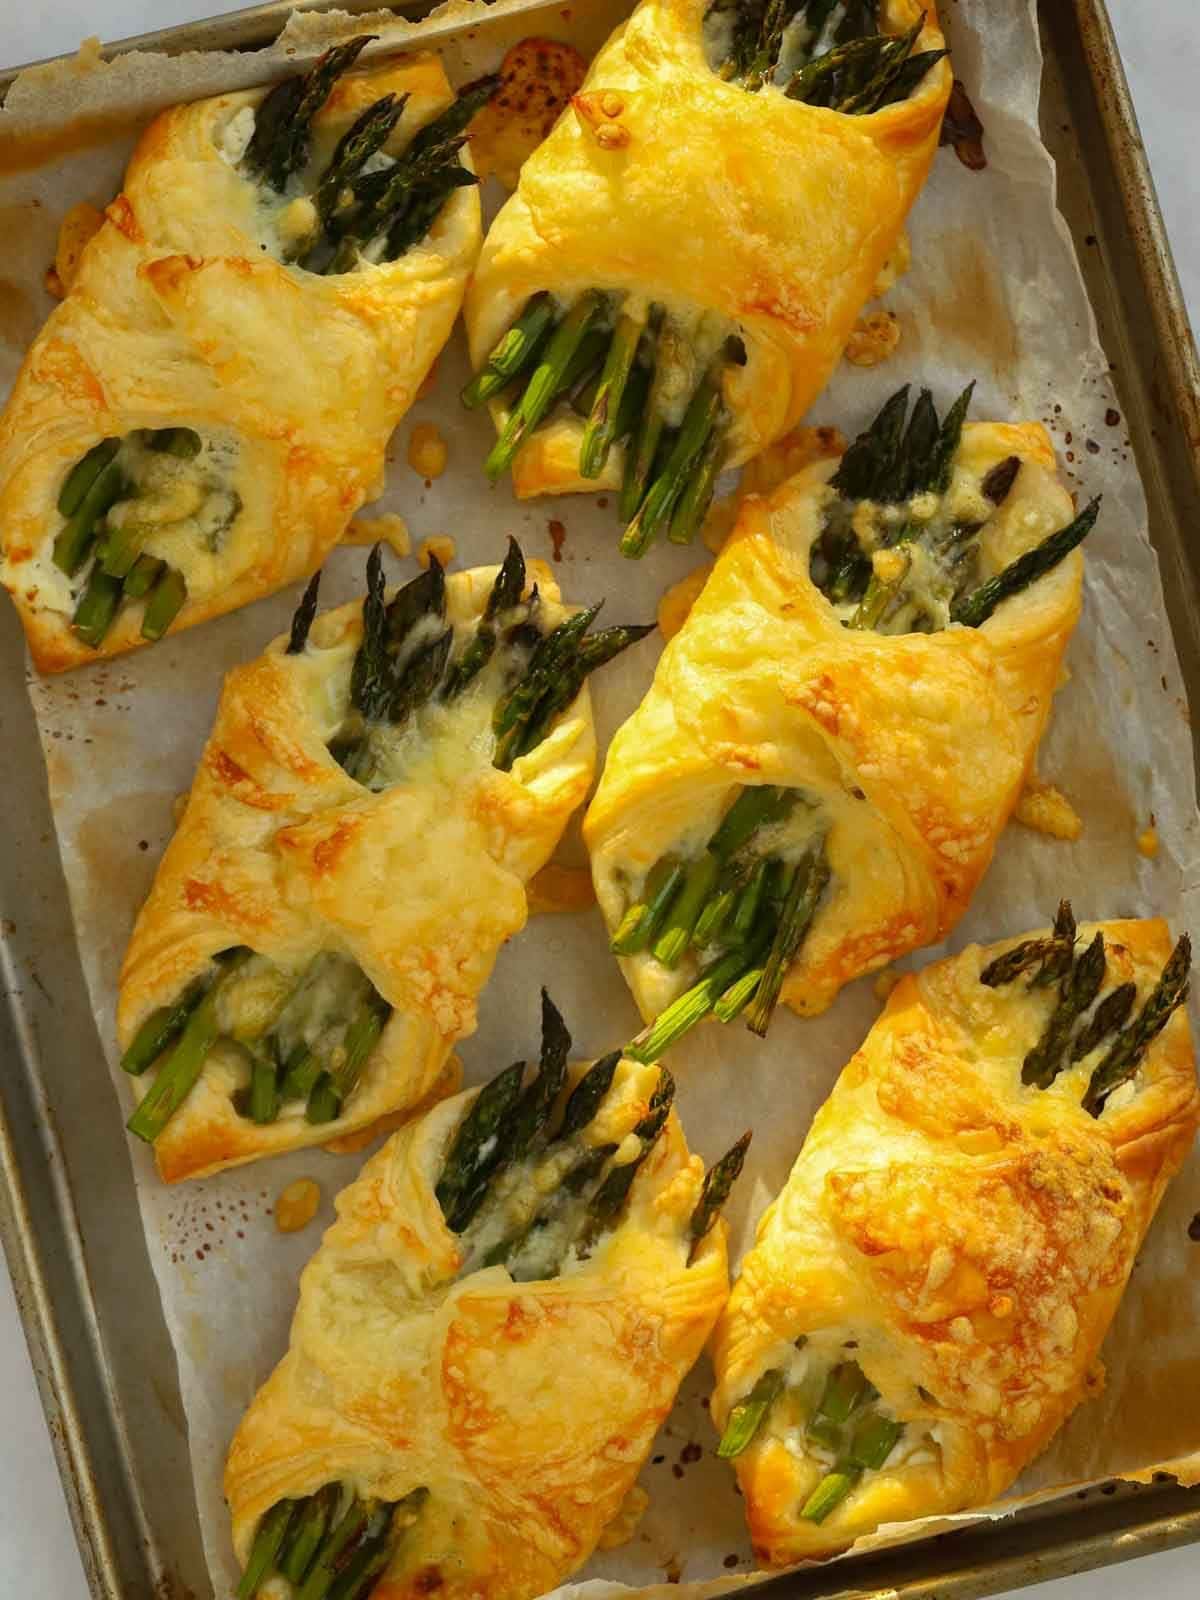 Puff pastry nibbles with asparagus and cheese inside on a baking tray, golden brown from the oven.